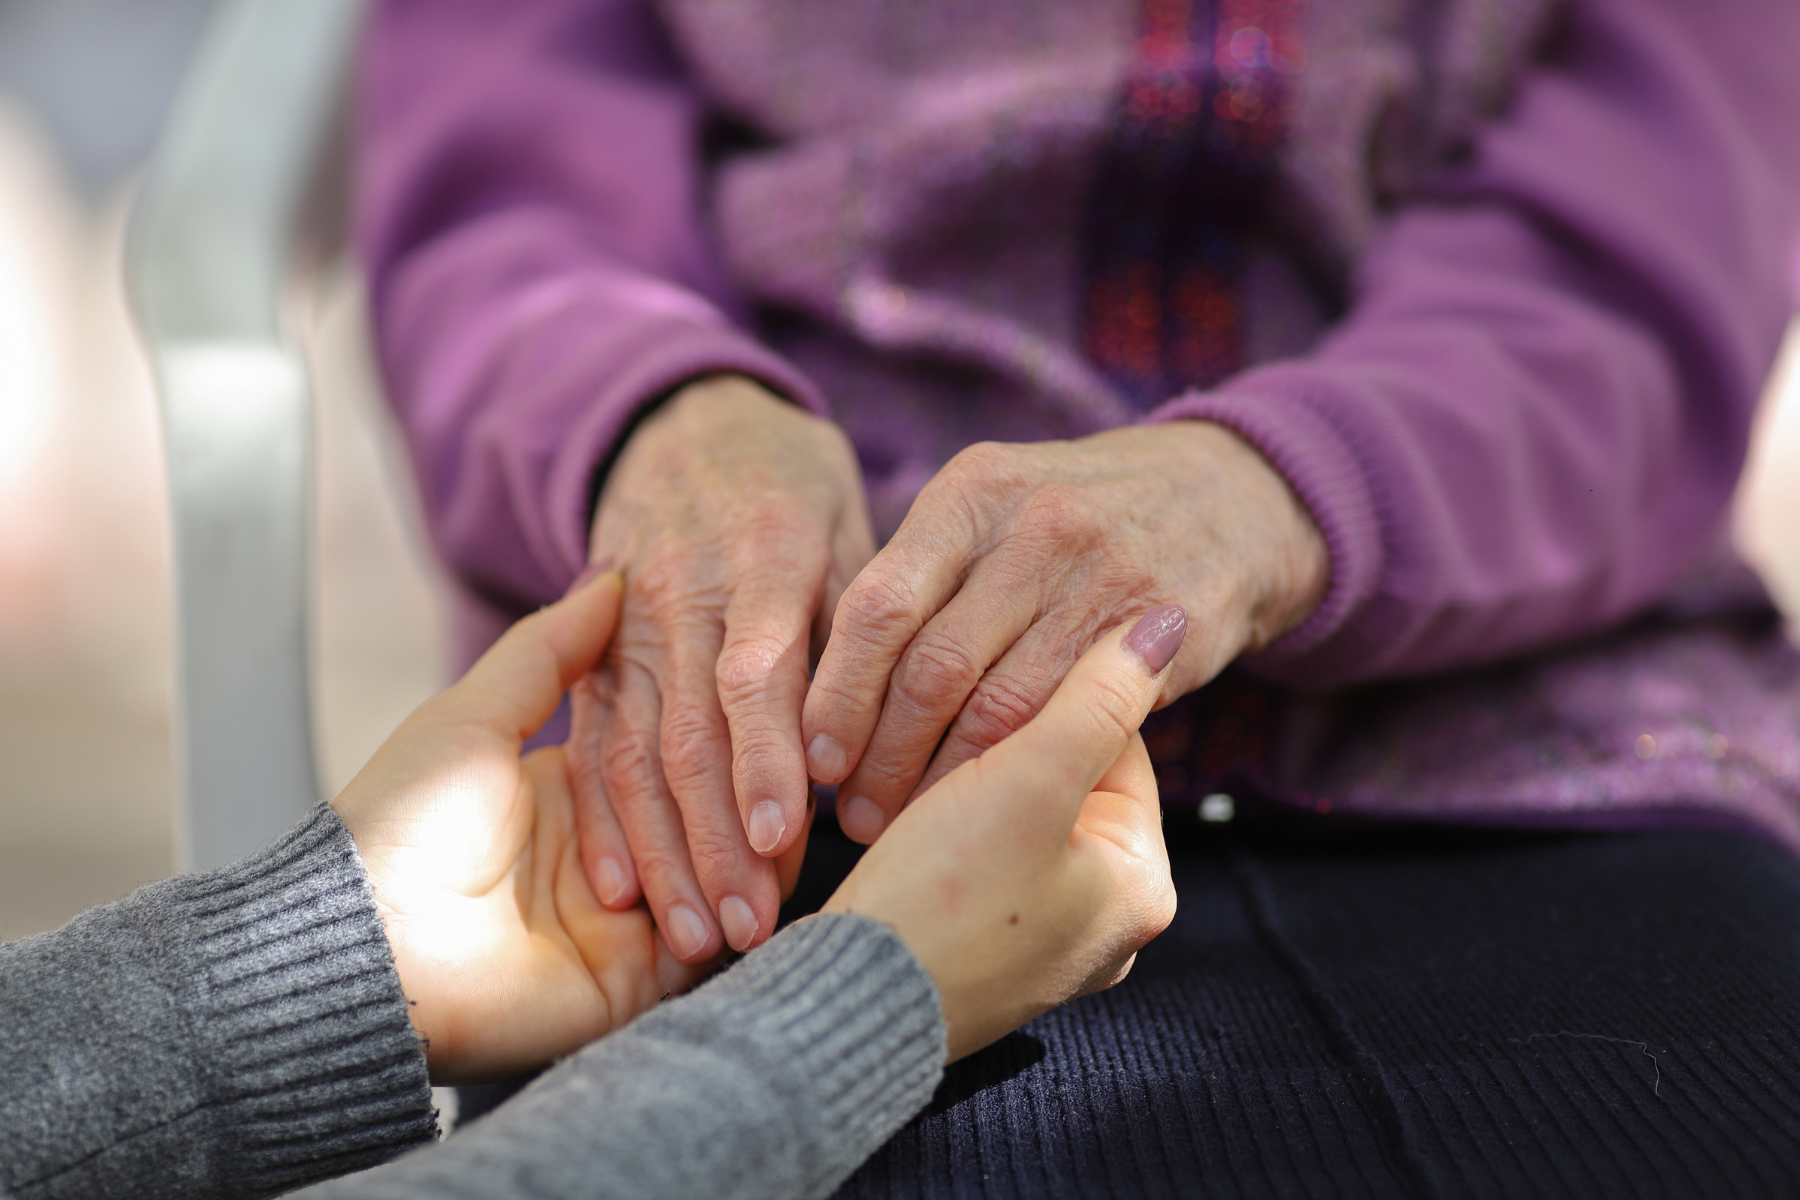 Nurturing Harmony in Caregiving: Open Communication and Conflict Prevention